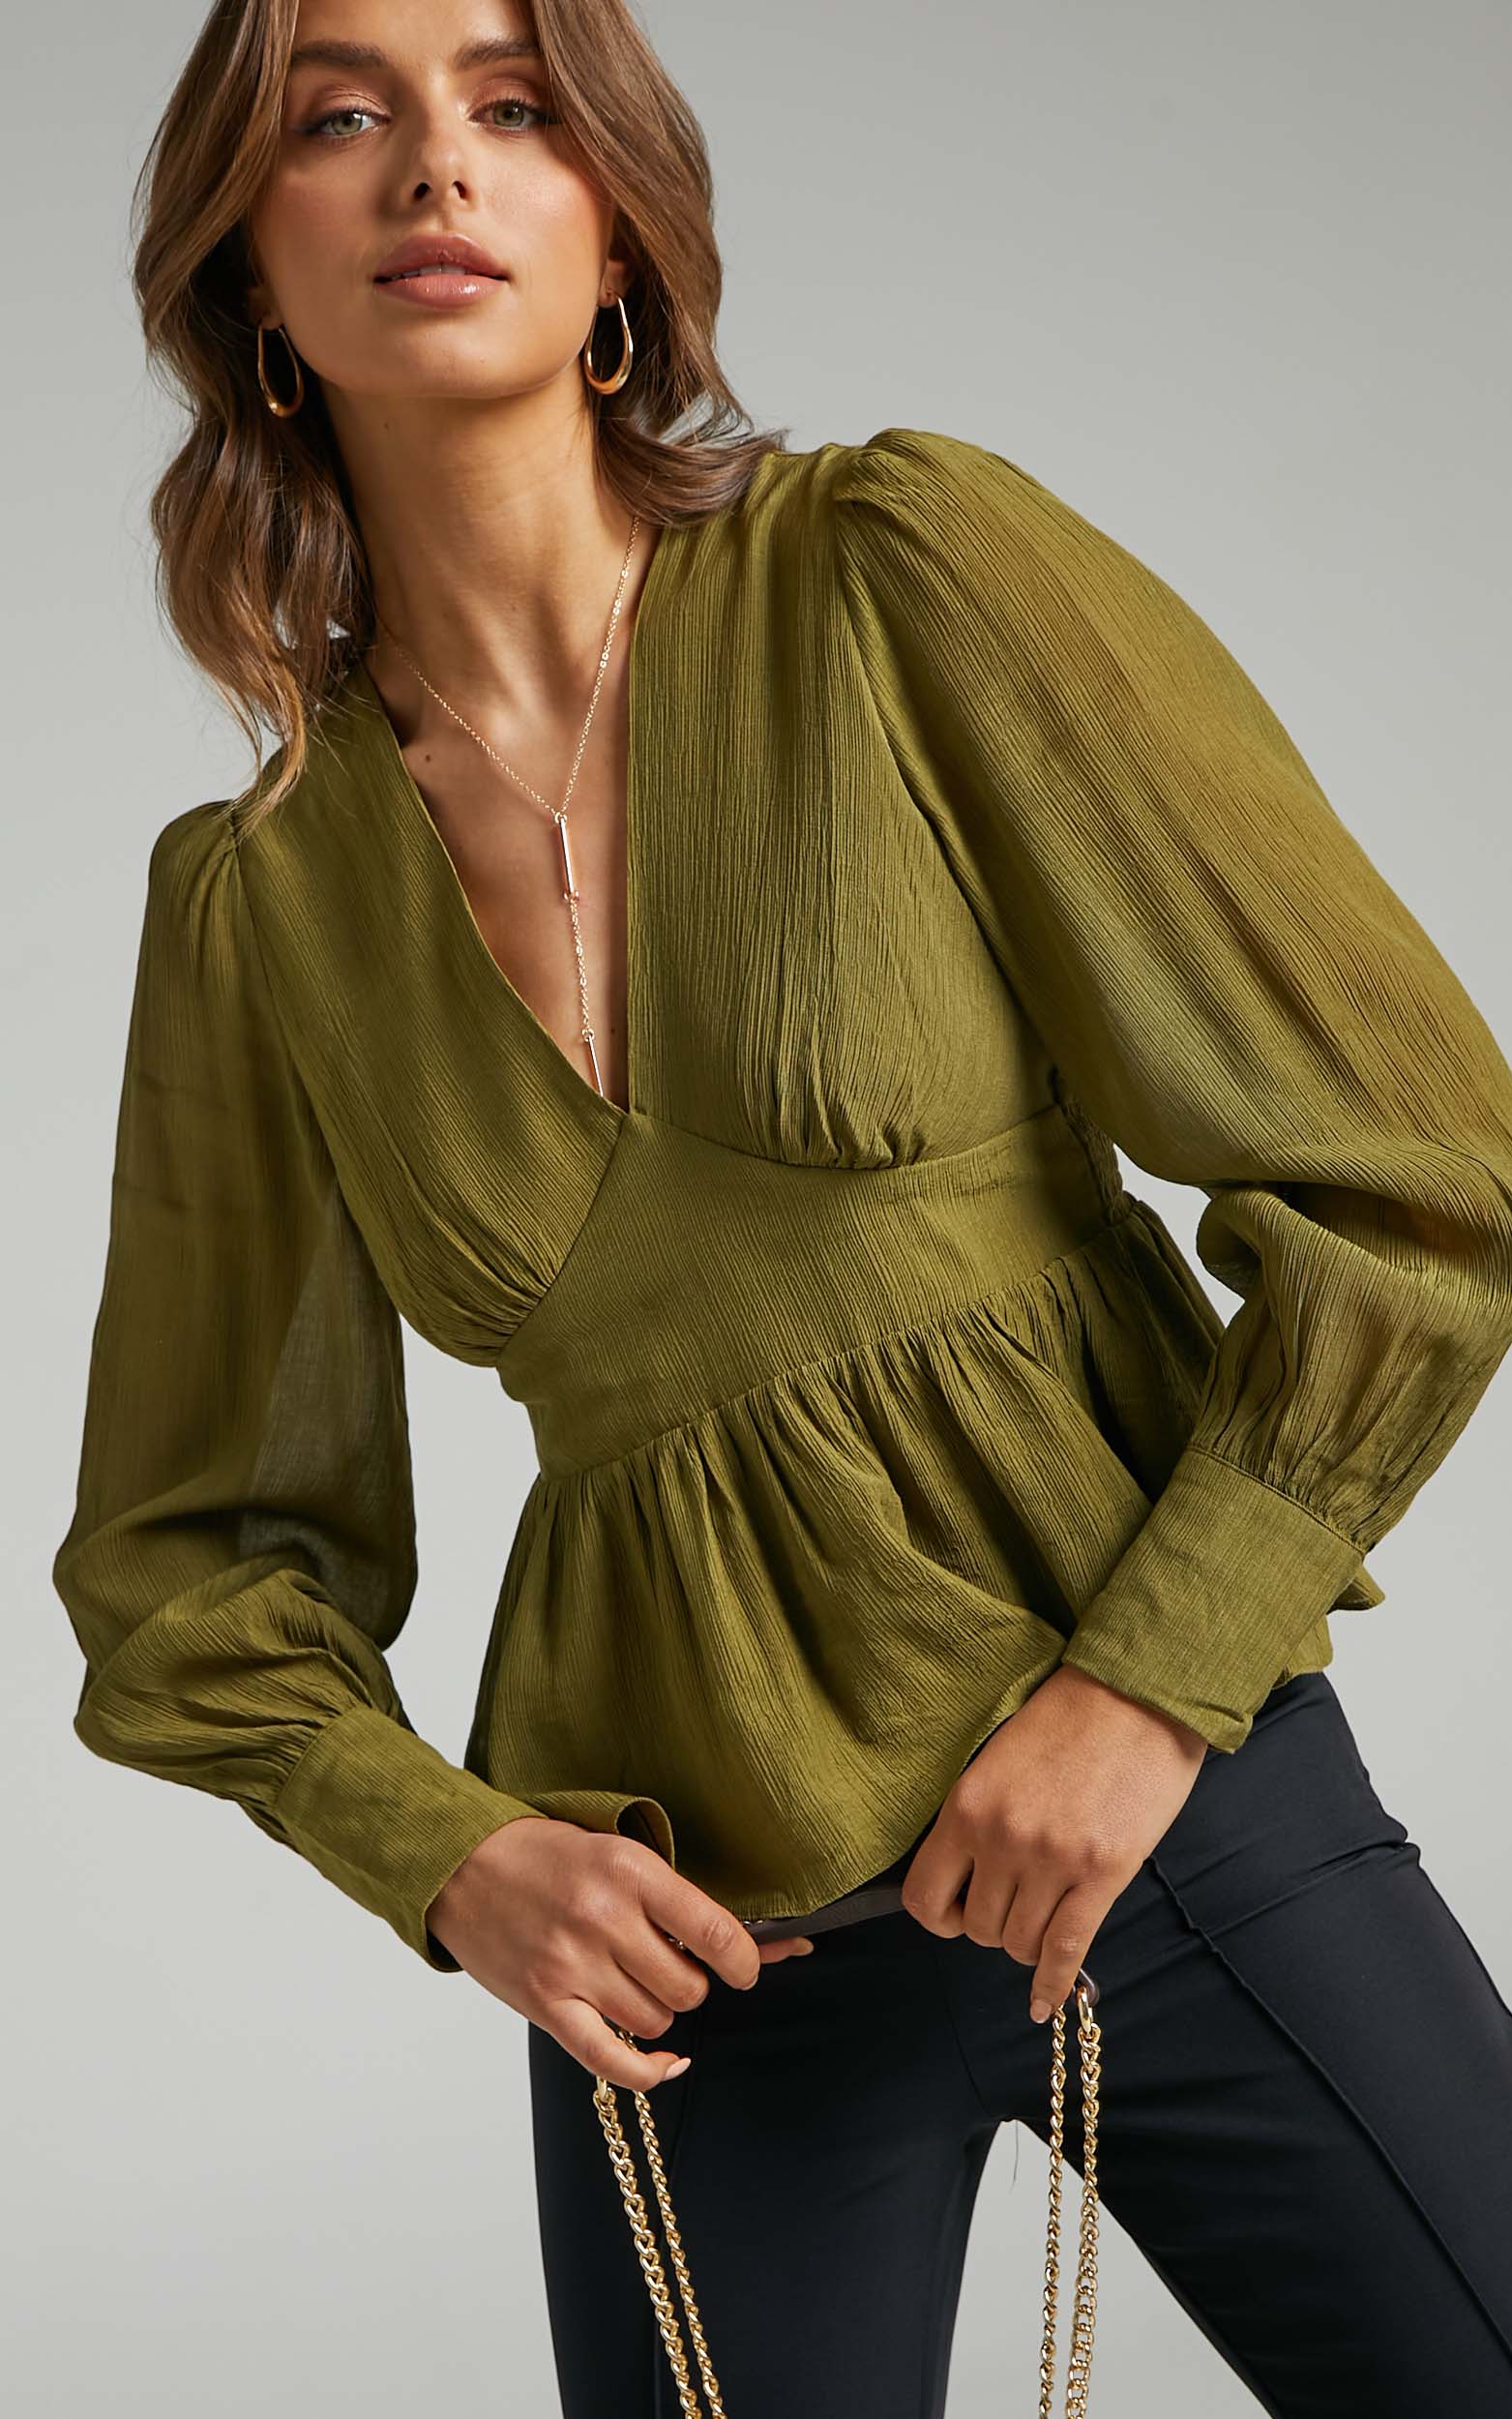 Shyla Balloon Sleeve Peplum Top in Green - 06, GRN1, hi-res image number null